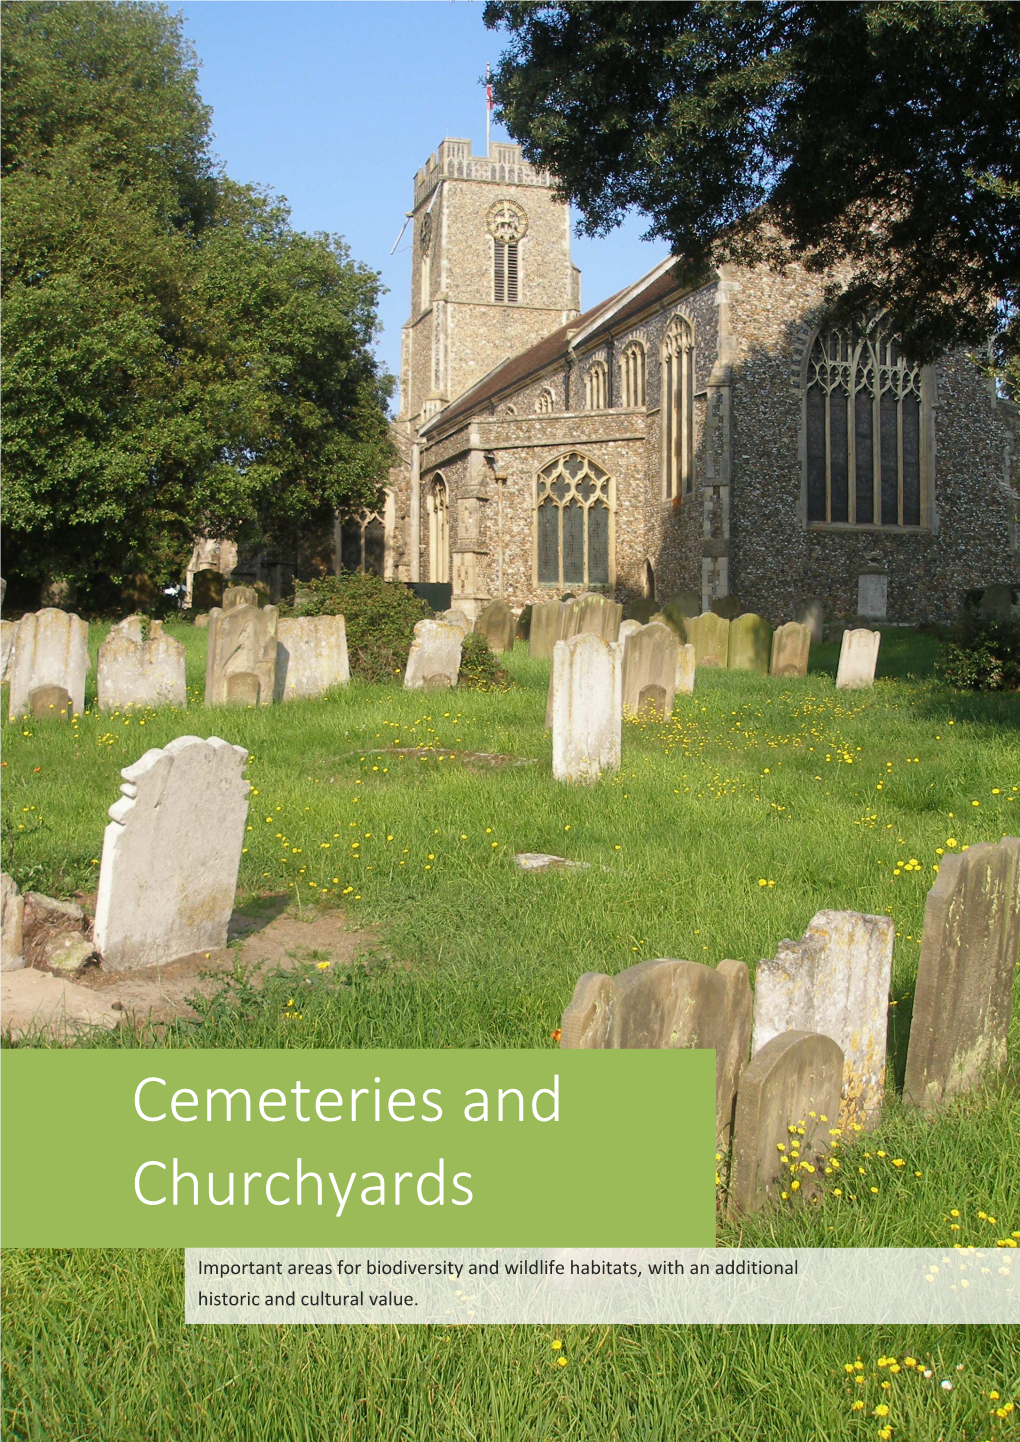 Cemeteries and Churchyards